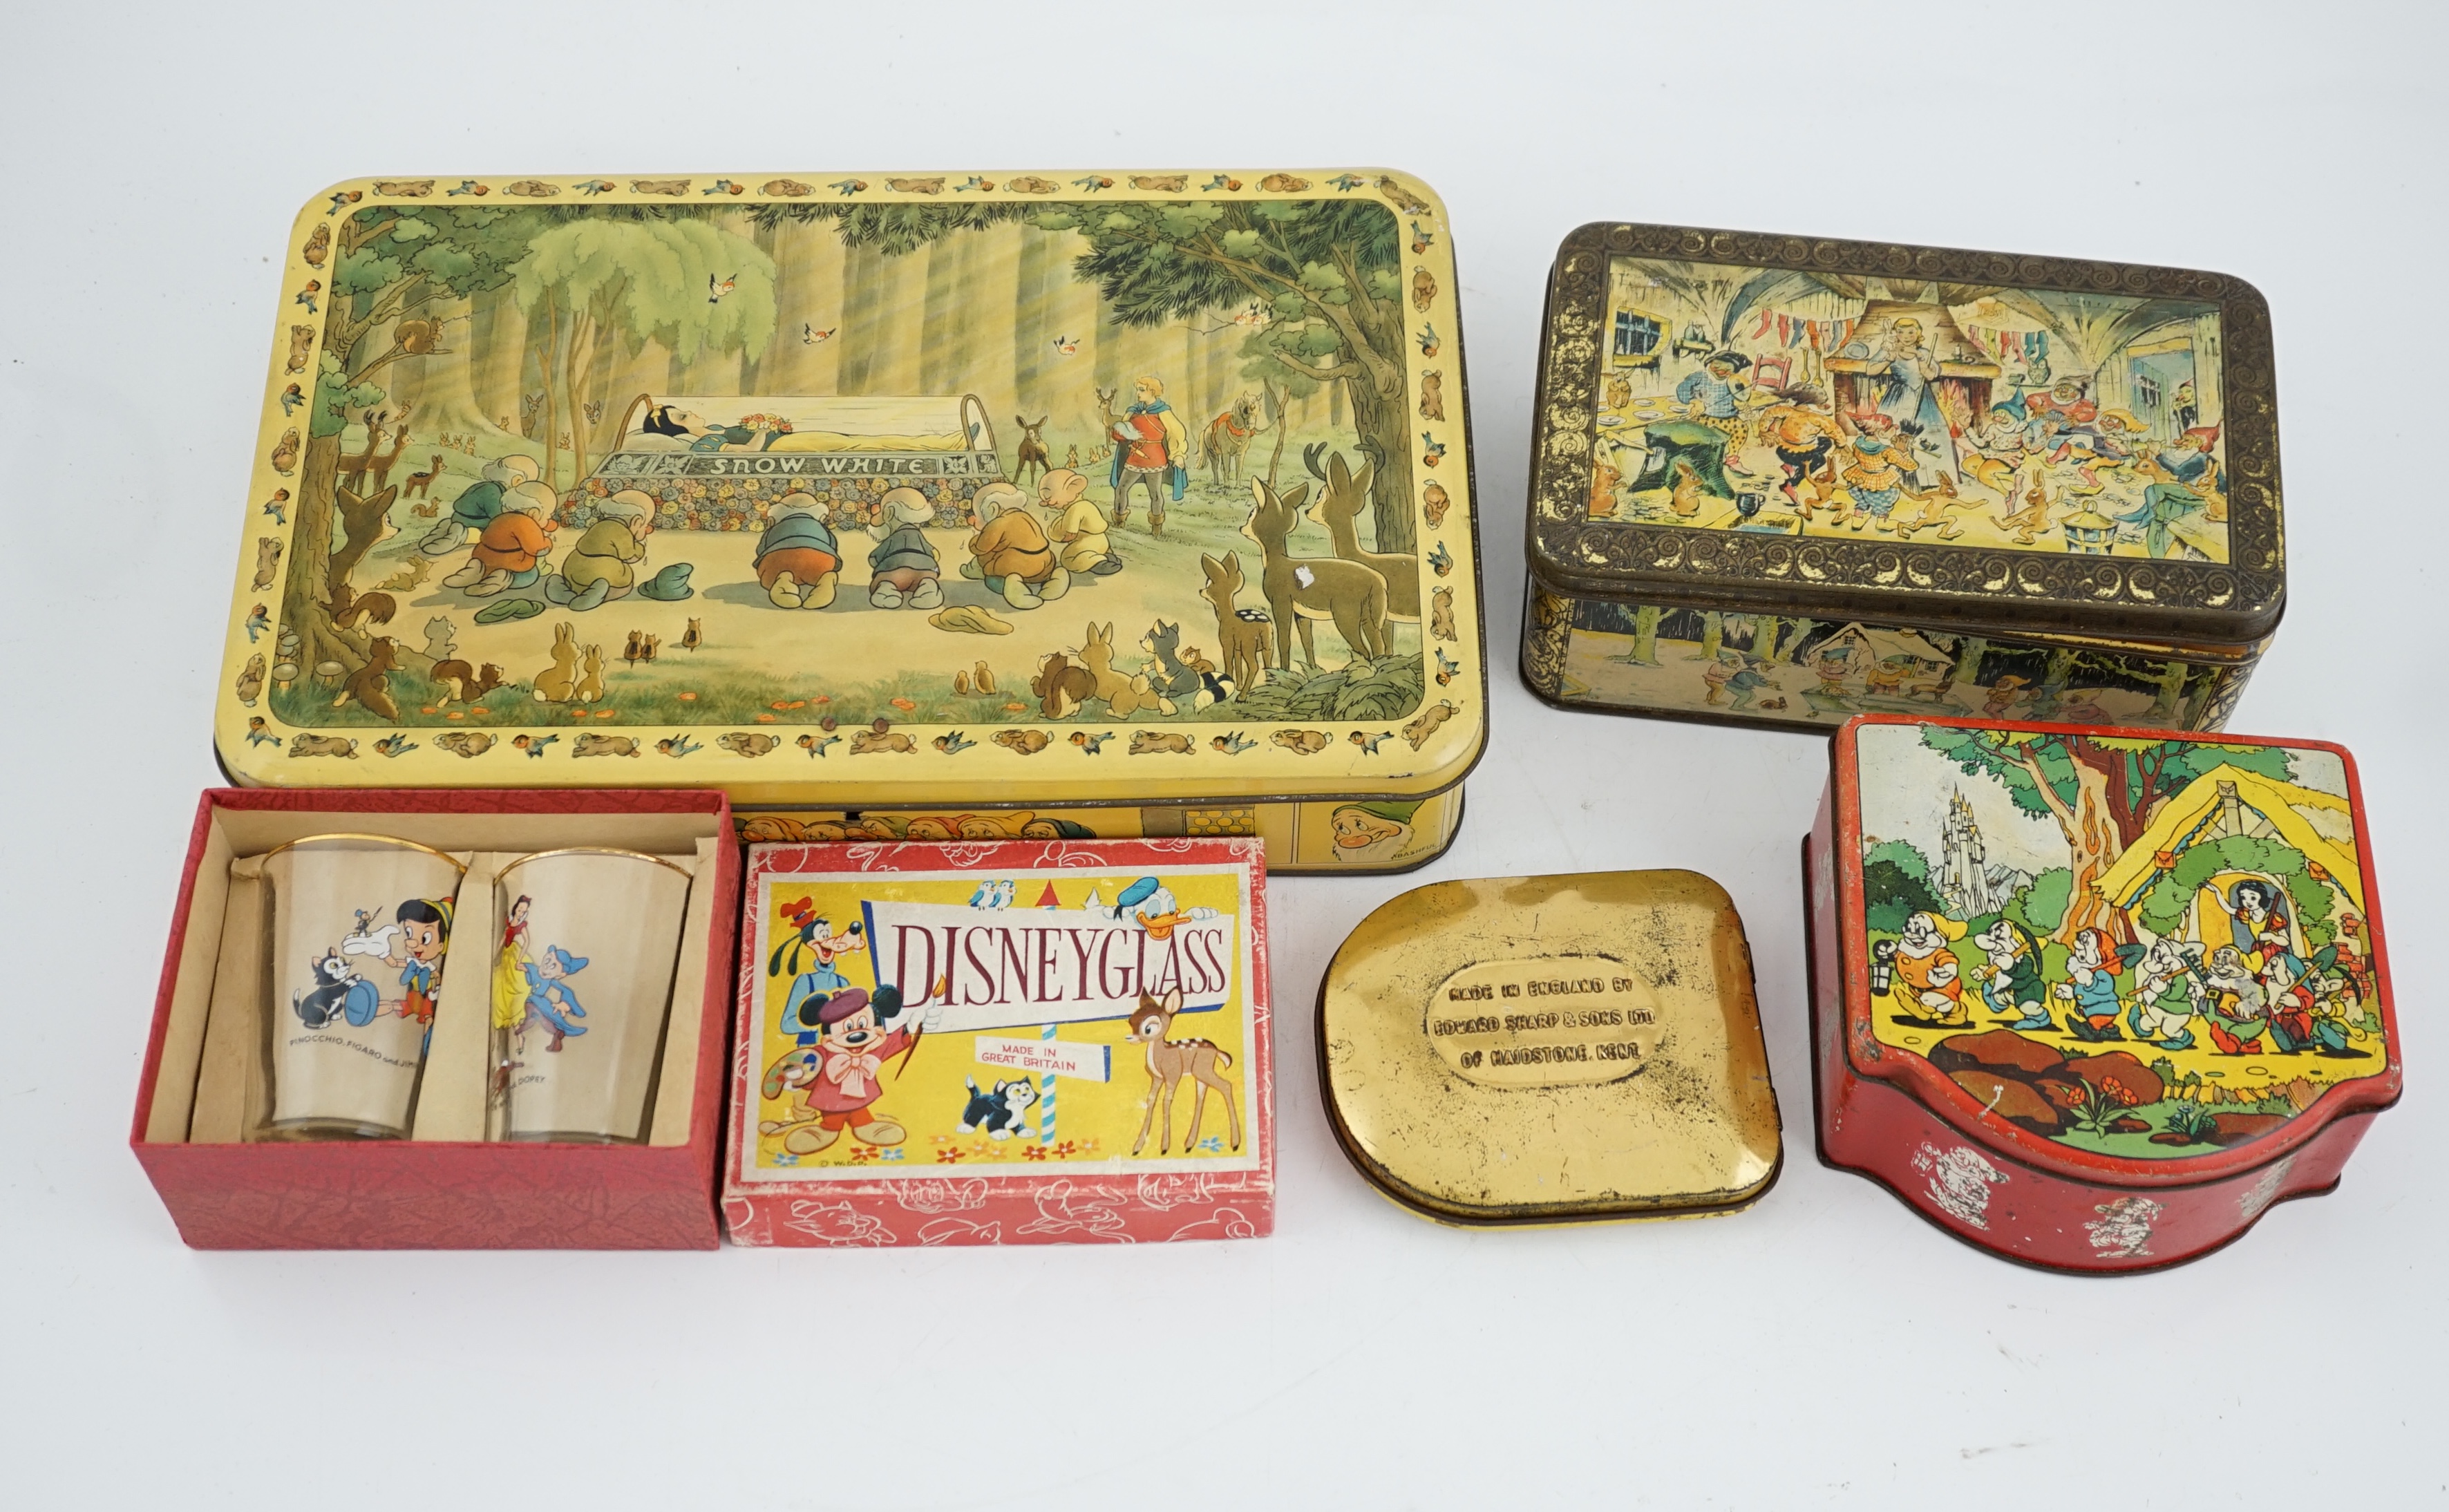 A collection of Disney Snow White memorabilia, including a porcelain set of eight figures by Goebel, W. Germany